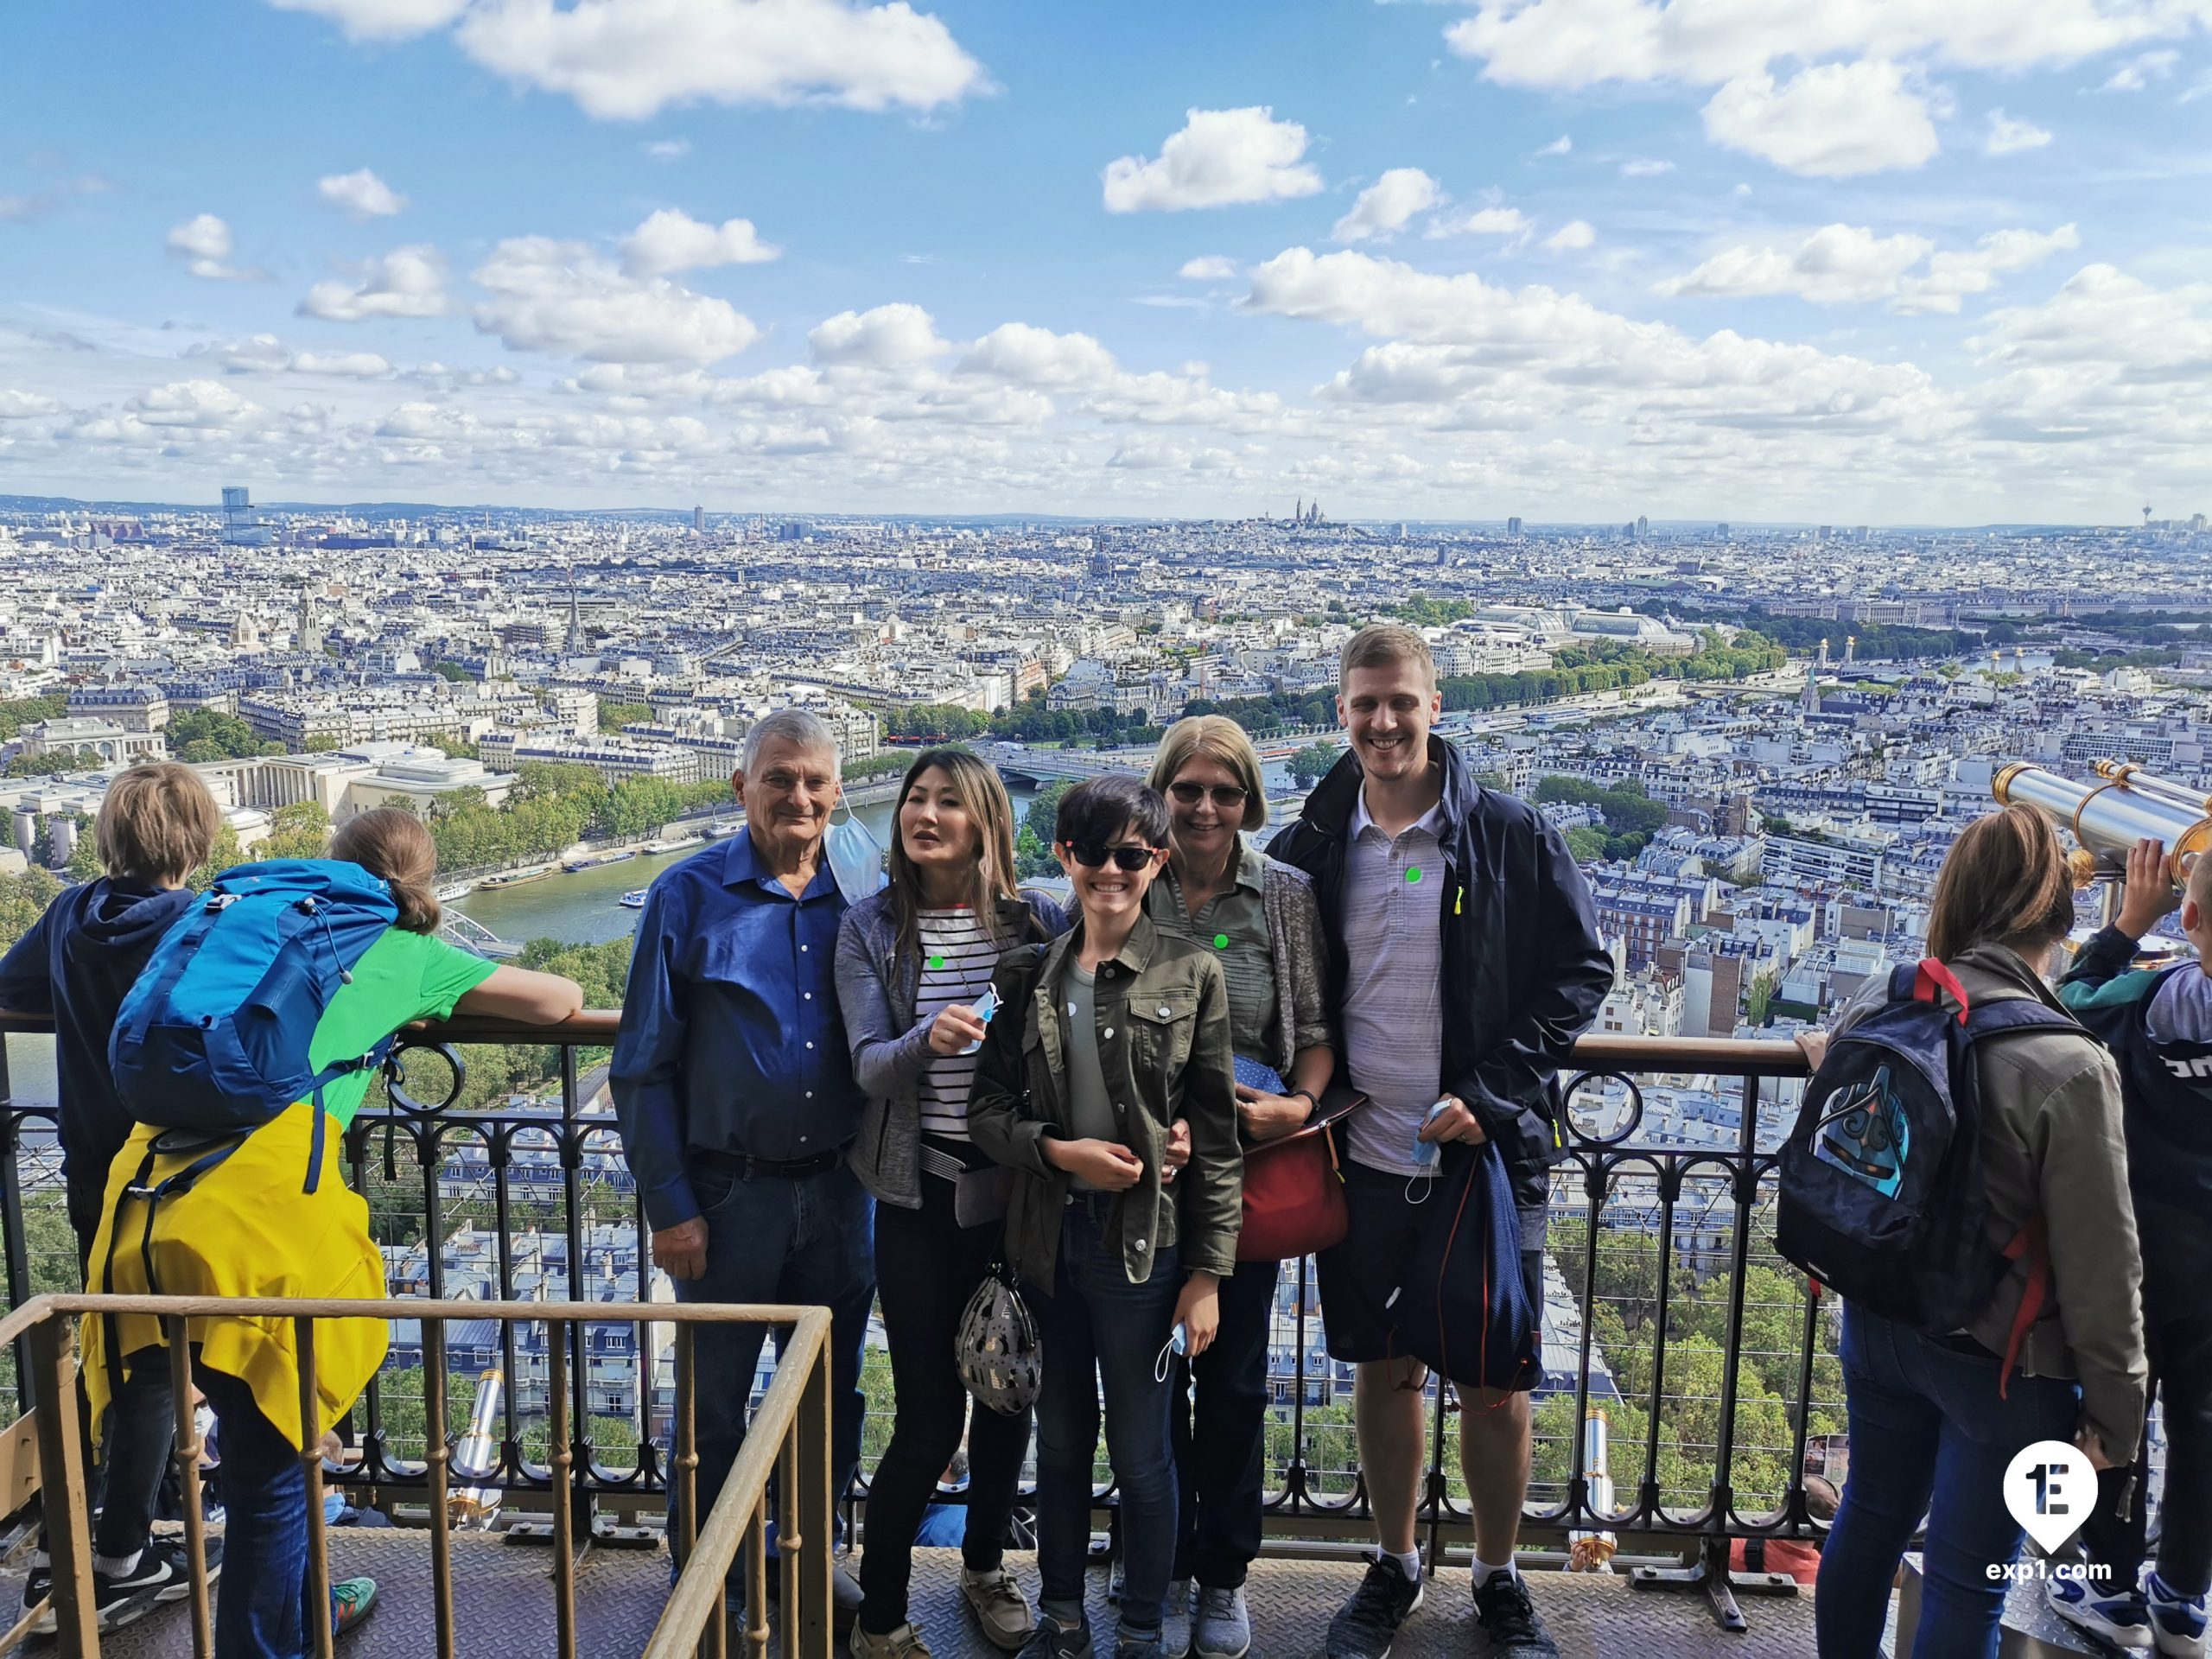 One of our tour groups having a blast at the Eiffel Tower in August